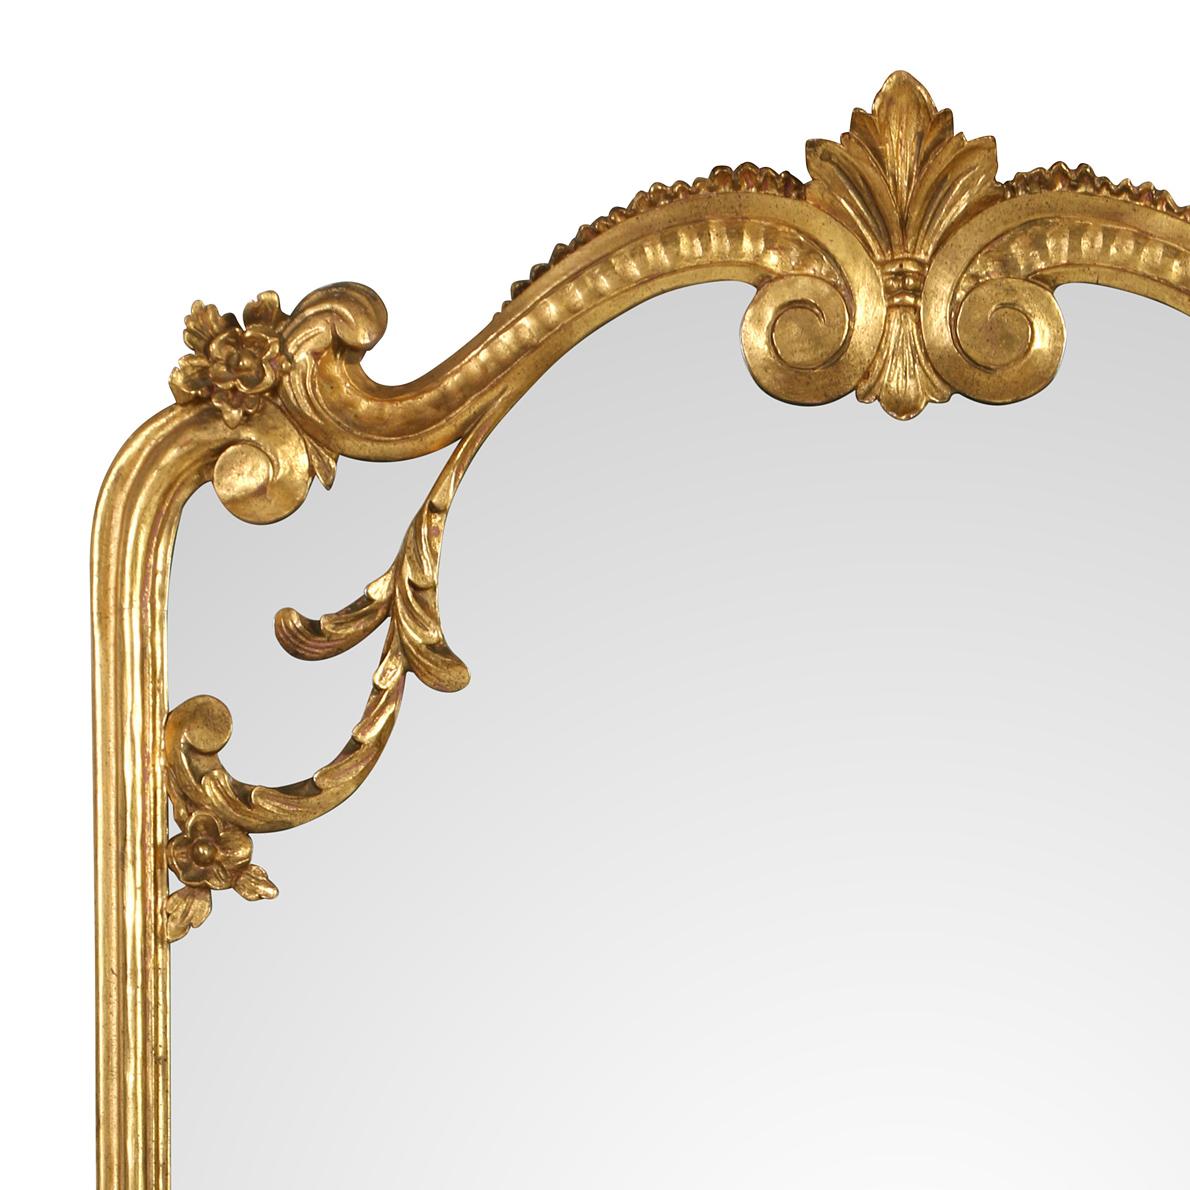 A rectangular giltwood mirror with a curved top.  Although substantial in size, the mirror has a light, airy feel.  The sides are molded and the top and base feature lovely carving in the Rococo style.  This lovely mirror would work in a bedroom,